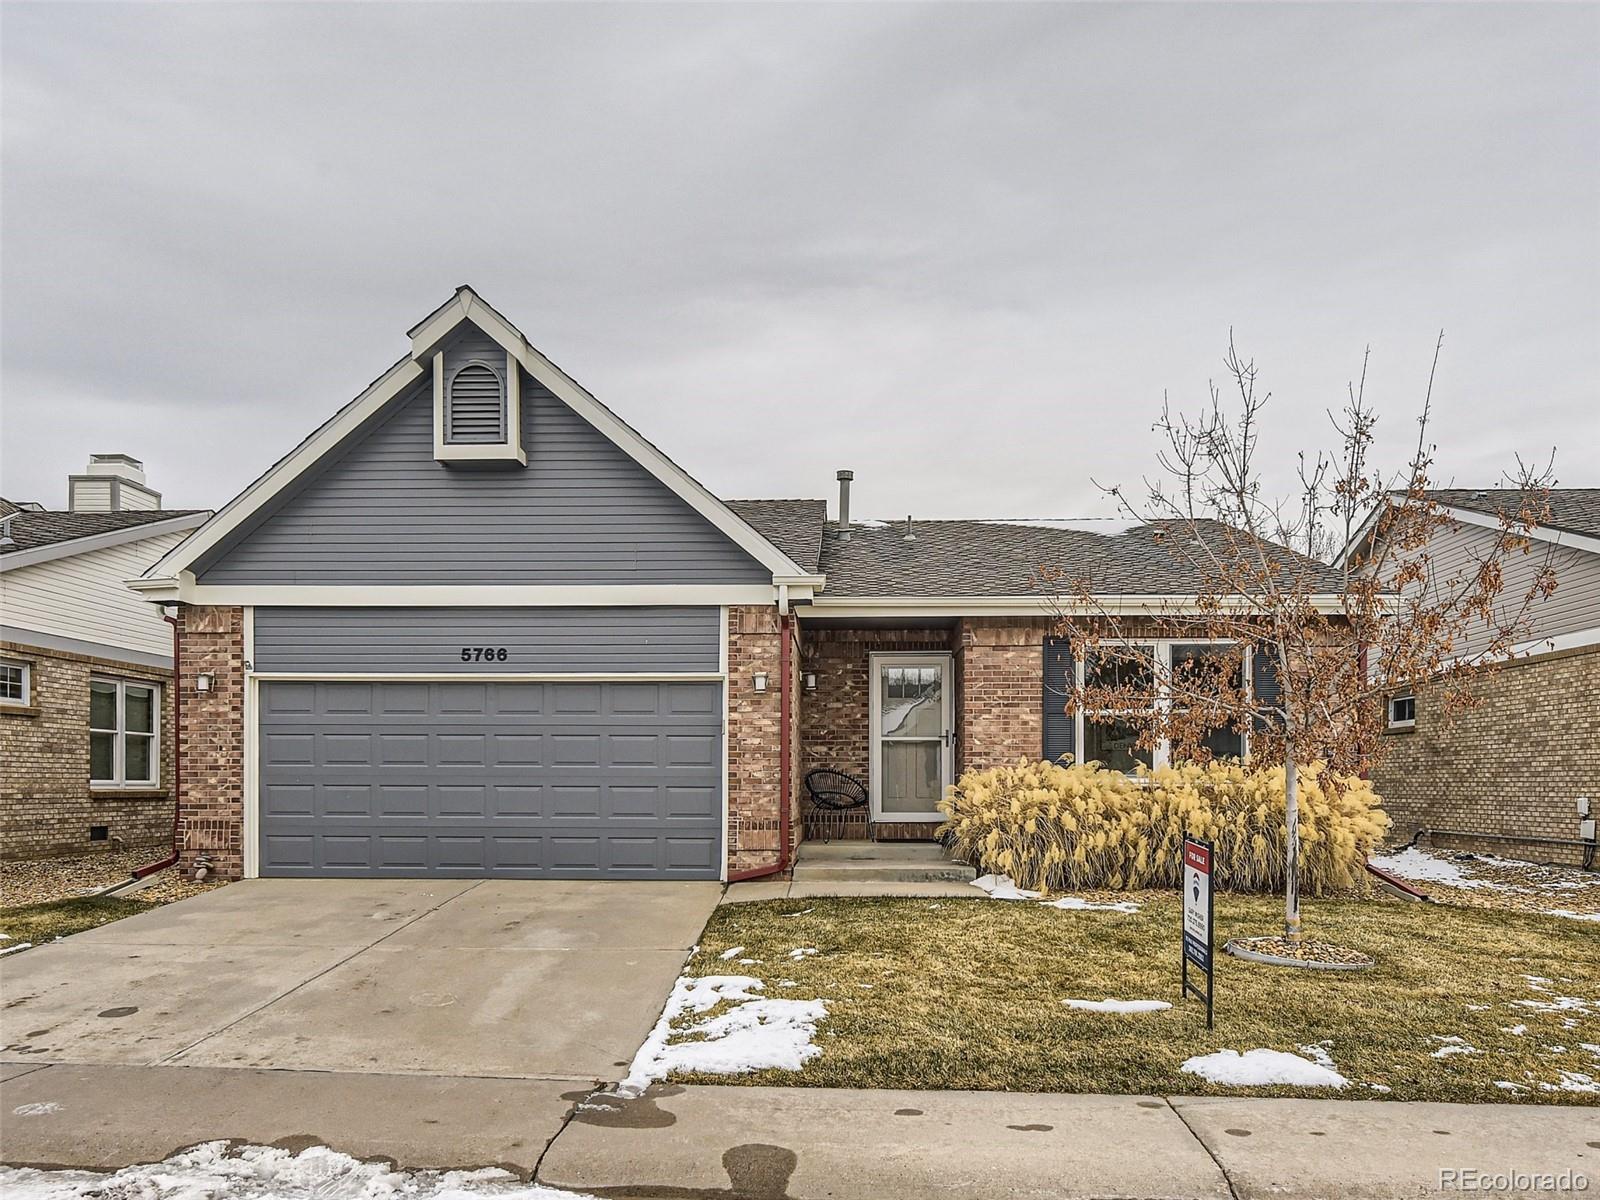 5766 E Greenspointe Way, highlands ranch MLS: 3661357 Beds: 2 Baths: 2 Price: $624,900